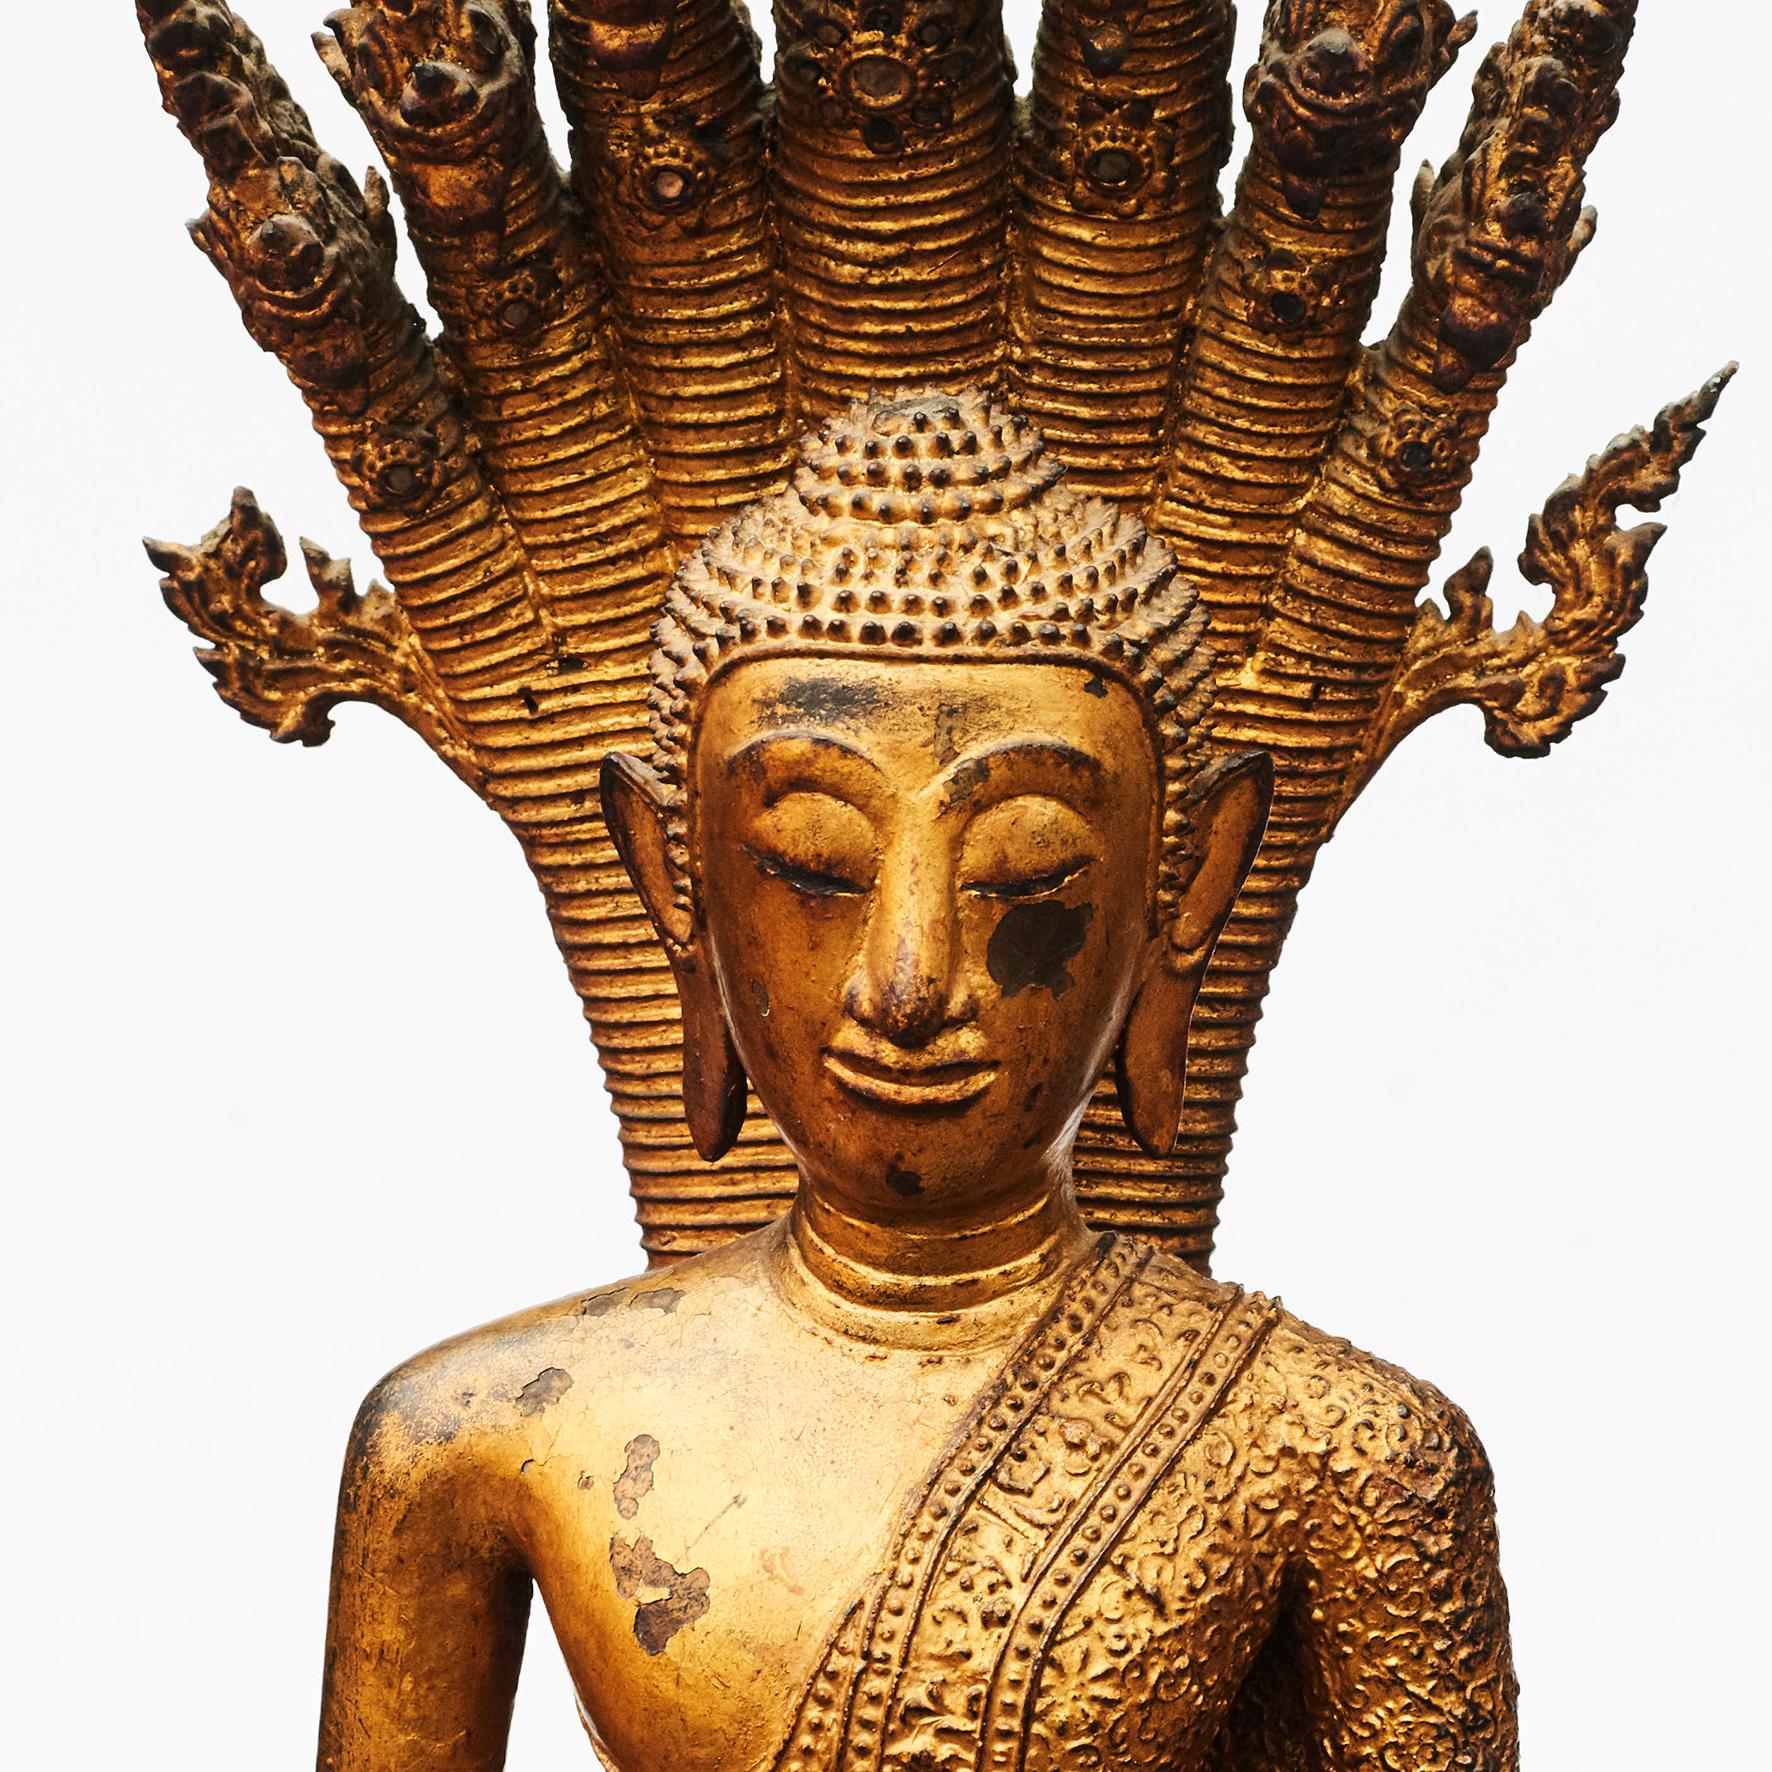 Rare bronze Buddha depicted in meditation pose sheltered by a Naga (a seven-headed snake).
Naga's body coiled up to serve as a cushion for the Buddha with 7 pronged head providing a hood over the Buddha's head as a cover.

Original condition,